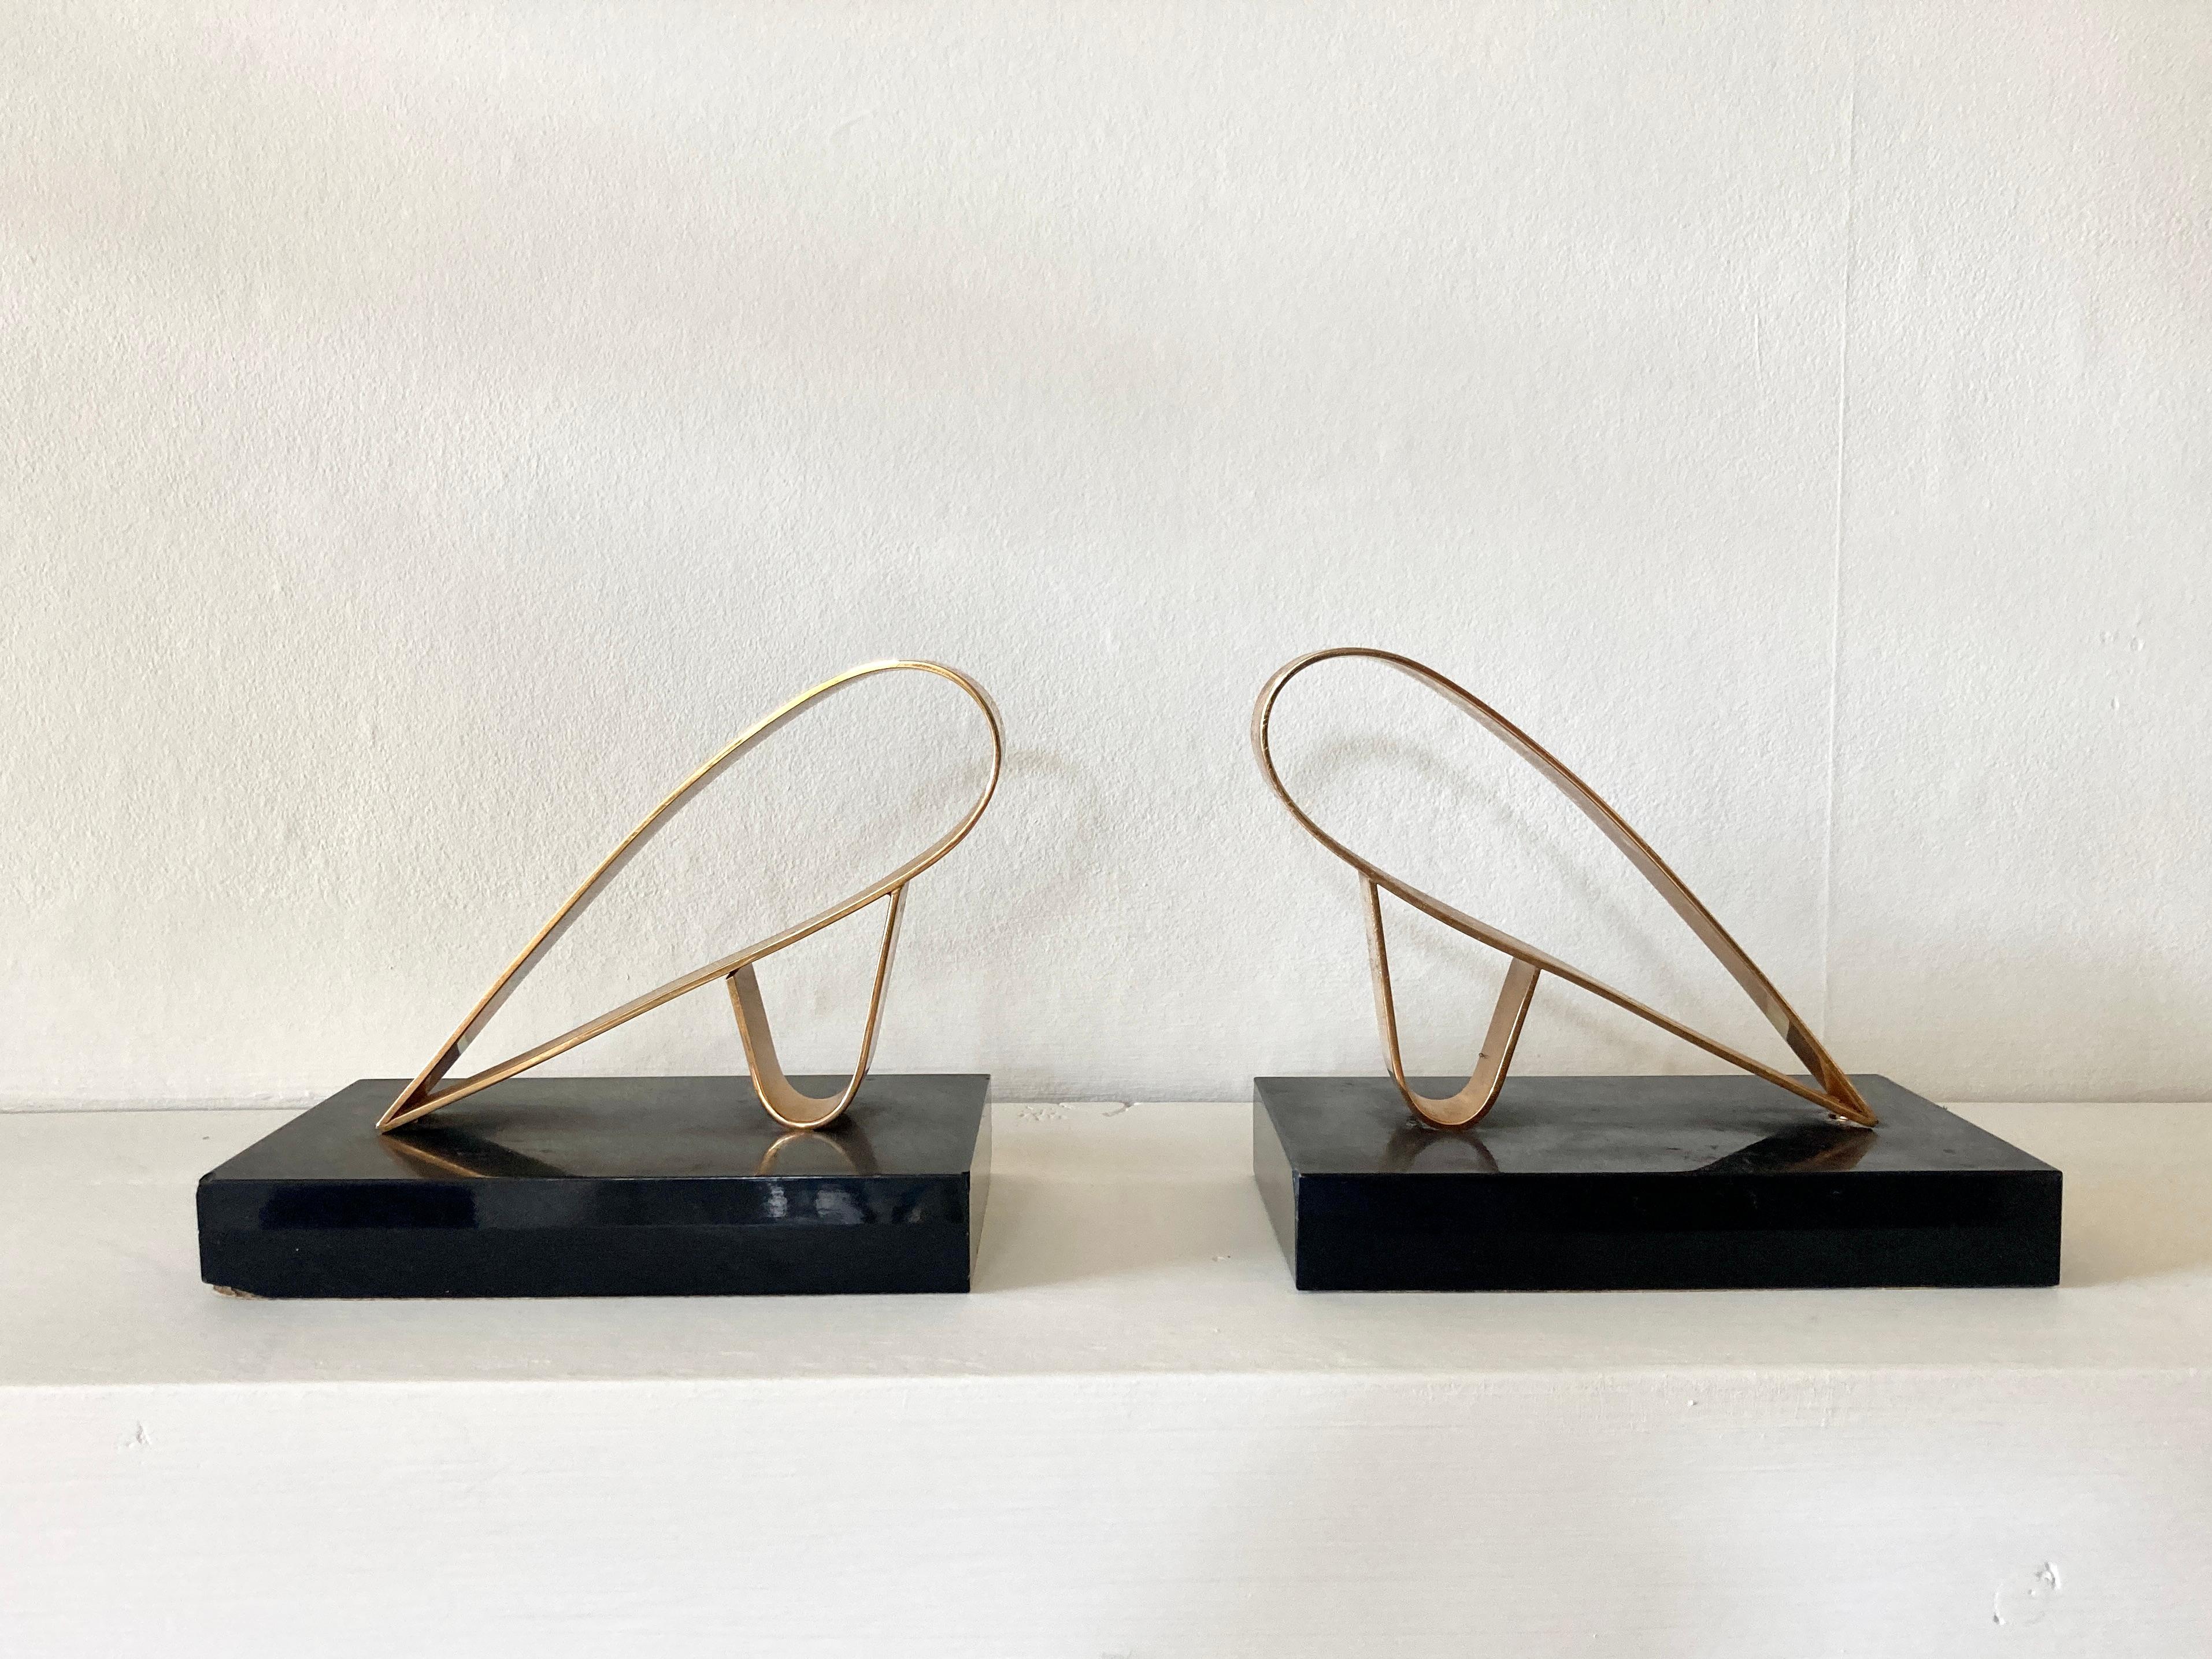 Pair of modernist bookends by the company Gold-Starry of Paris, France. 

Gold plated abstract sculptural forms on black marble. The baize on the underside of the plinths bears the company name.

Founded in 1912, Gold Starry was known for their